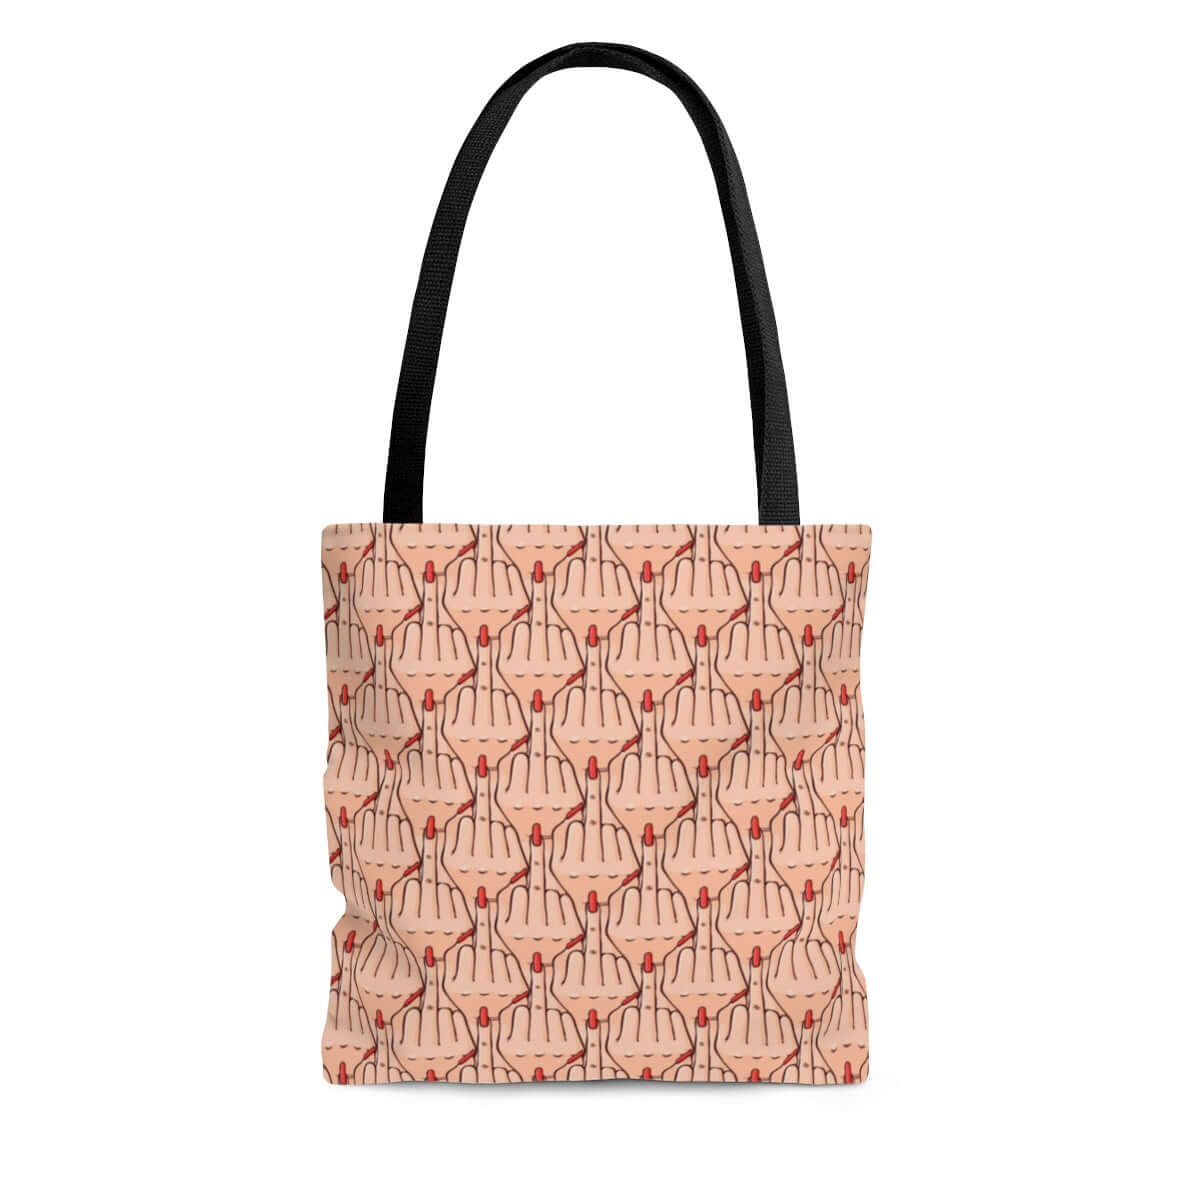 tote bag with all over printed middle fingers